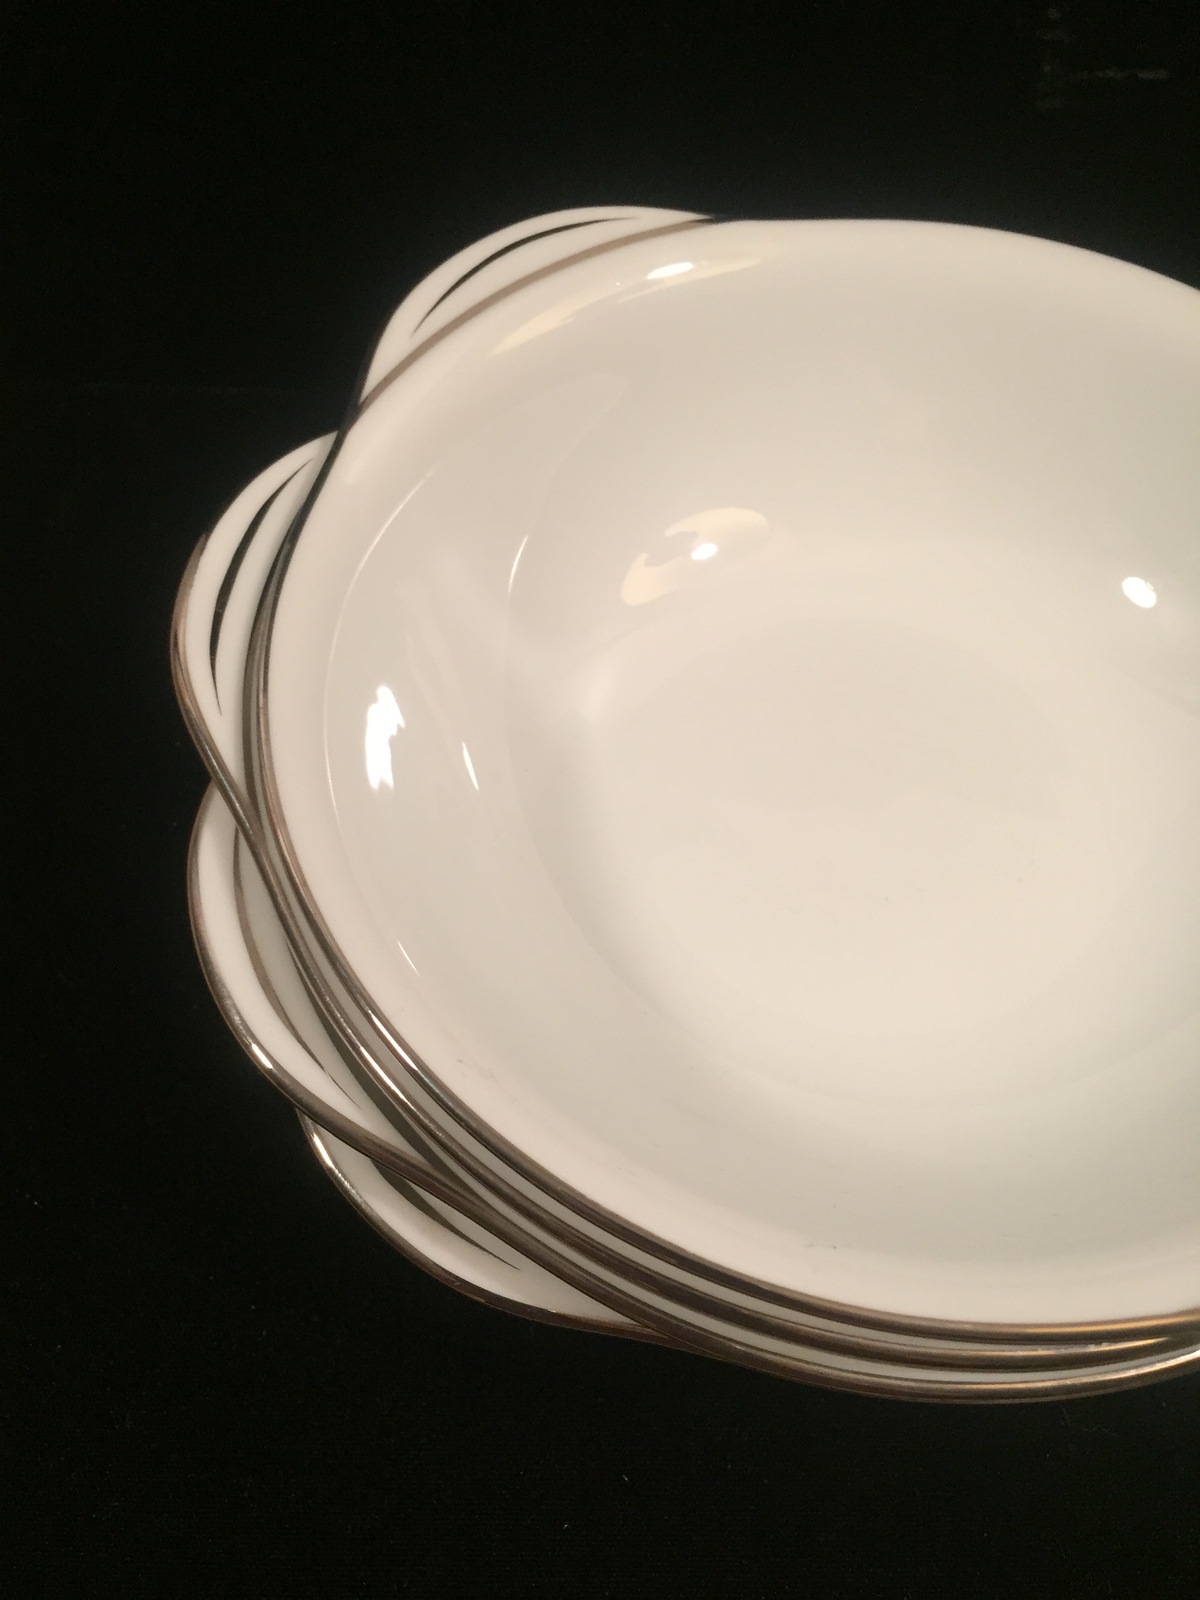  4 Noritake Colony pattern 5932 Lugged cereal bowls - Vintage 50s with platinum  - $50.00